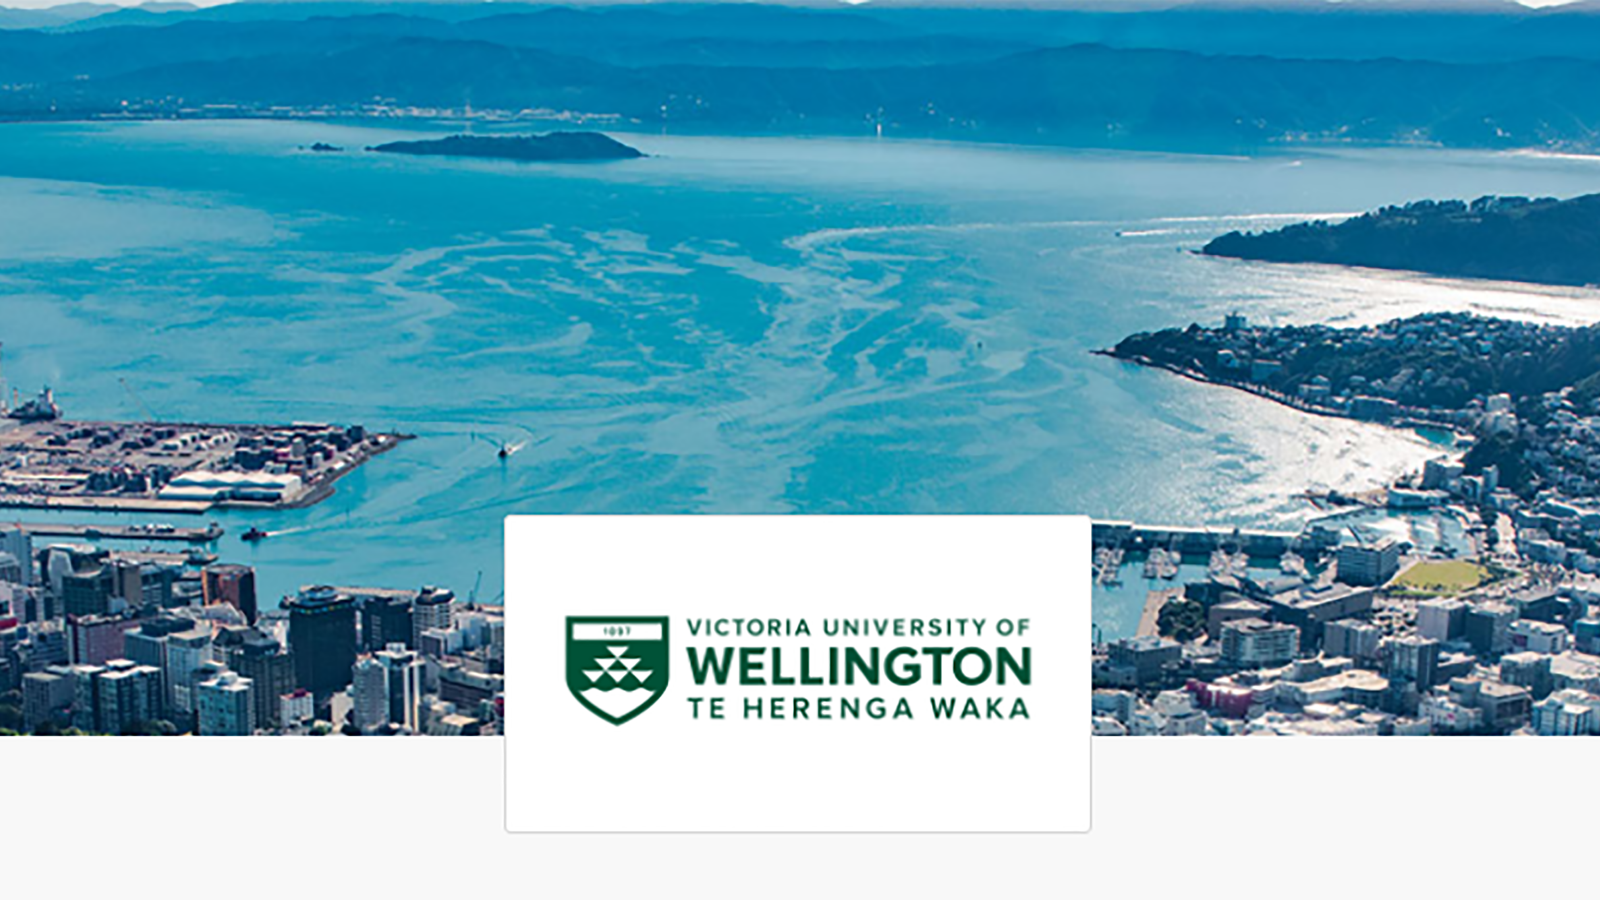 Snippet from home page of Open Access Repository showing Victoria University of Wellington logo overlaid on Wellington Harbour